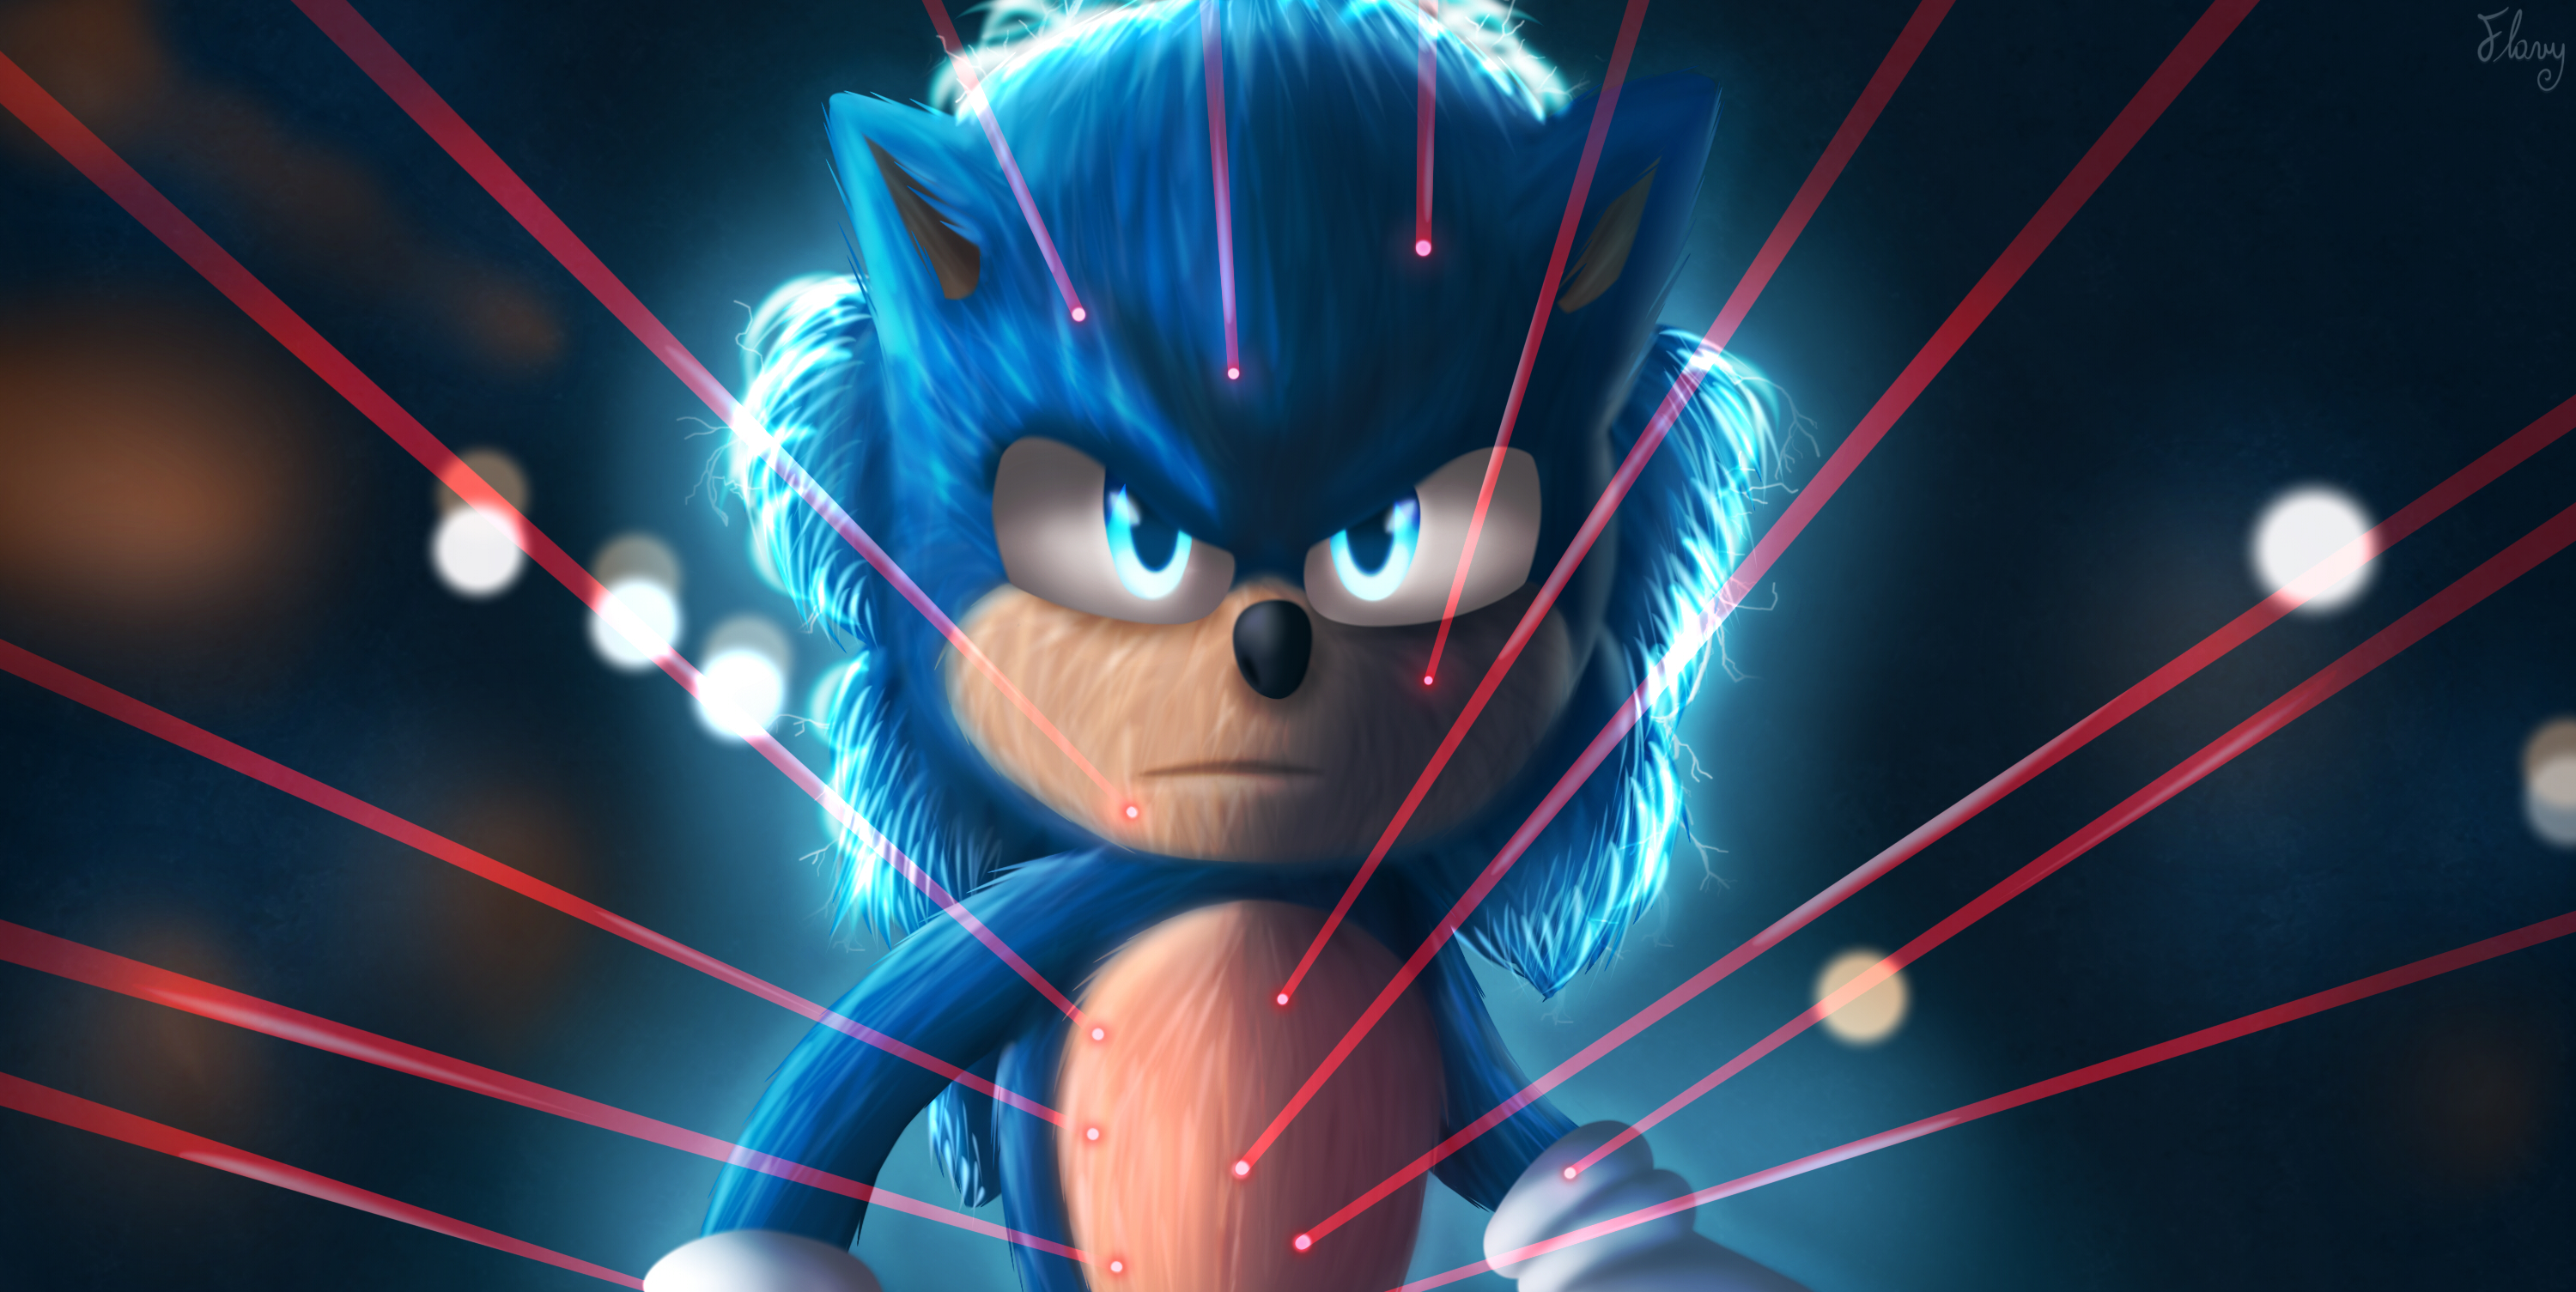 Sonic The Hedgehog4k Art, HD Movies, 4k Wallpapers, Images, Backgrounds